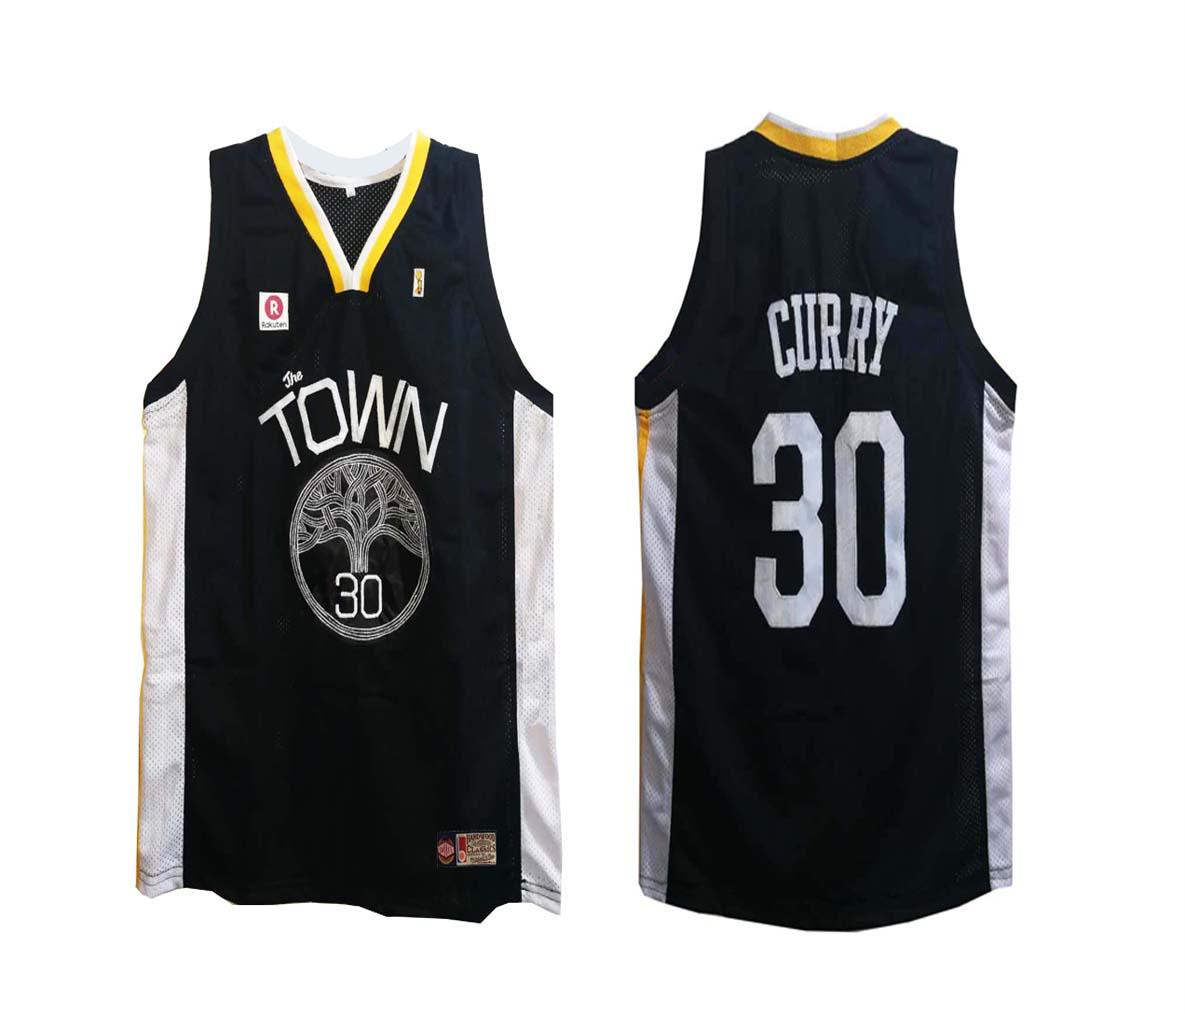 how to shrink basketball jersey